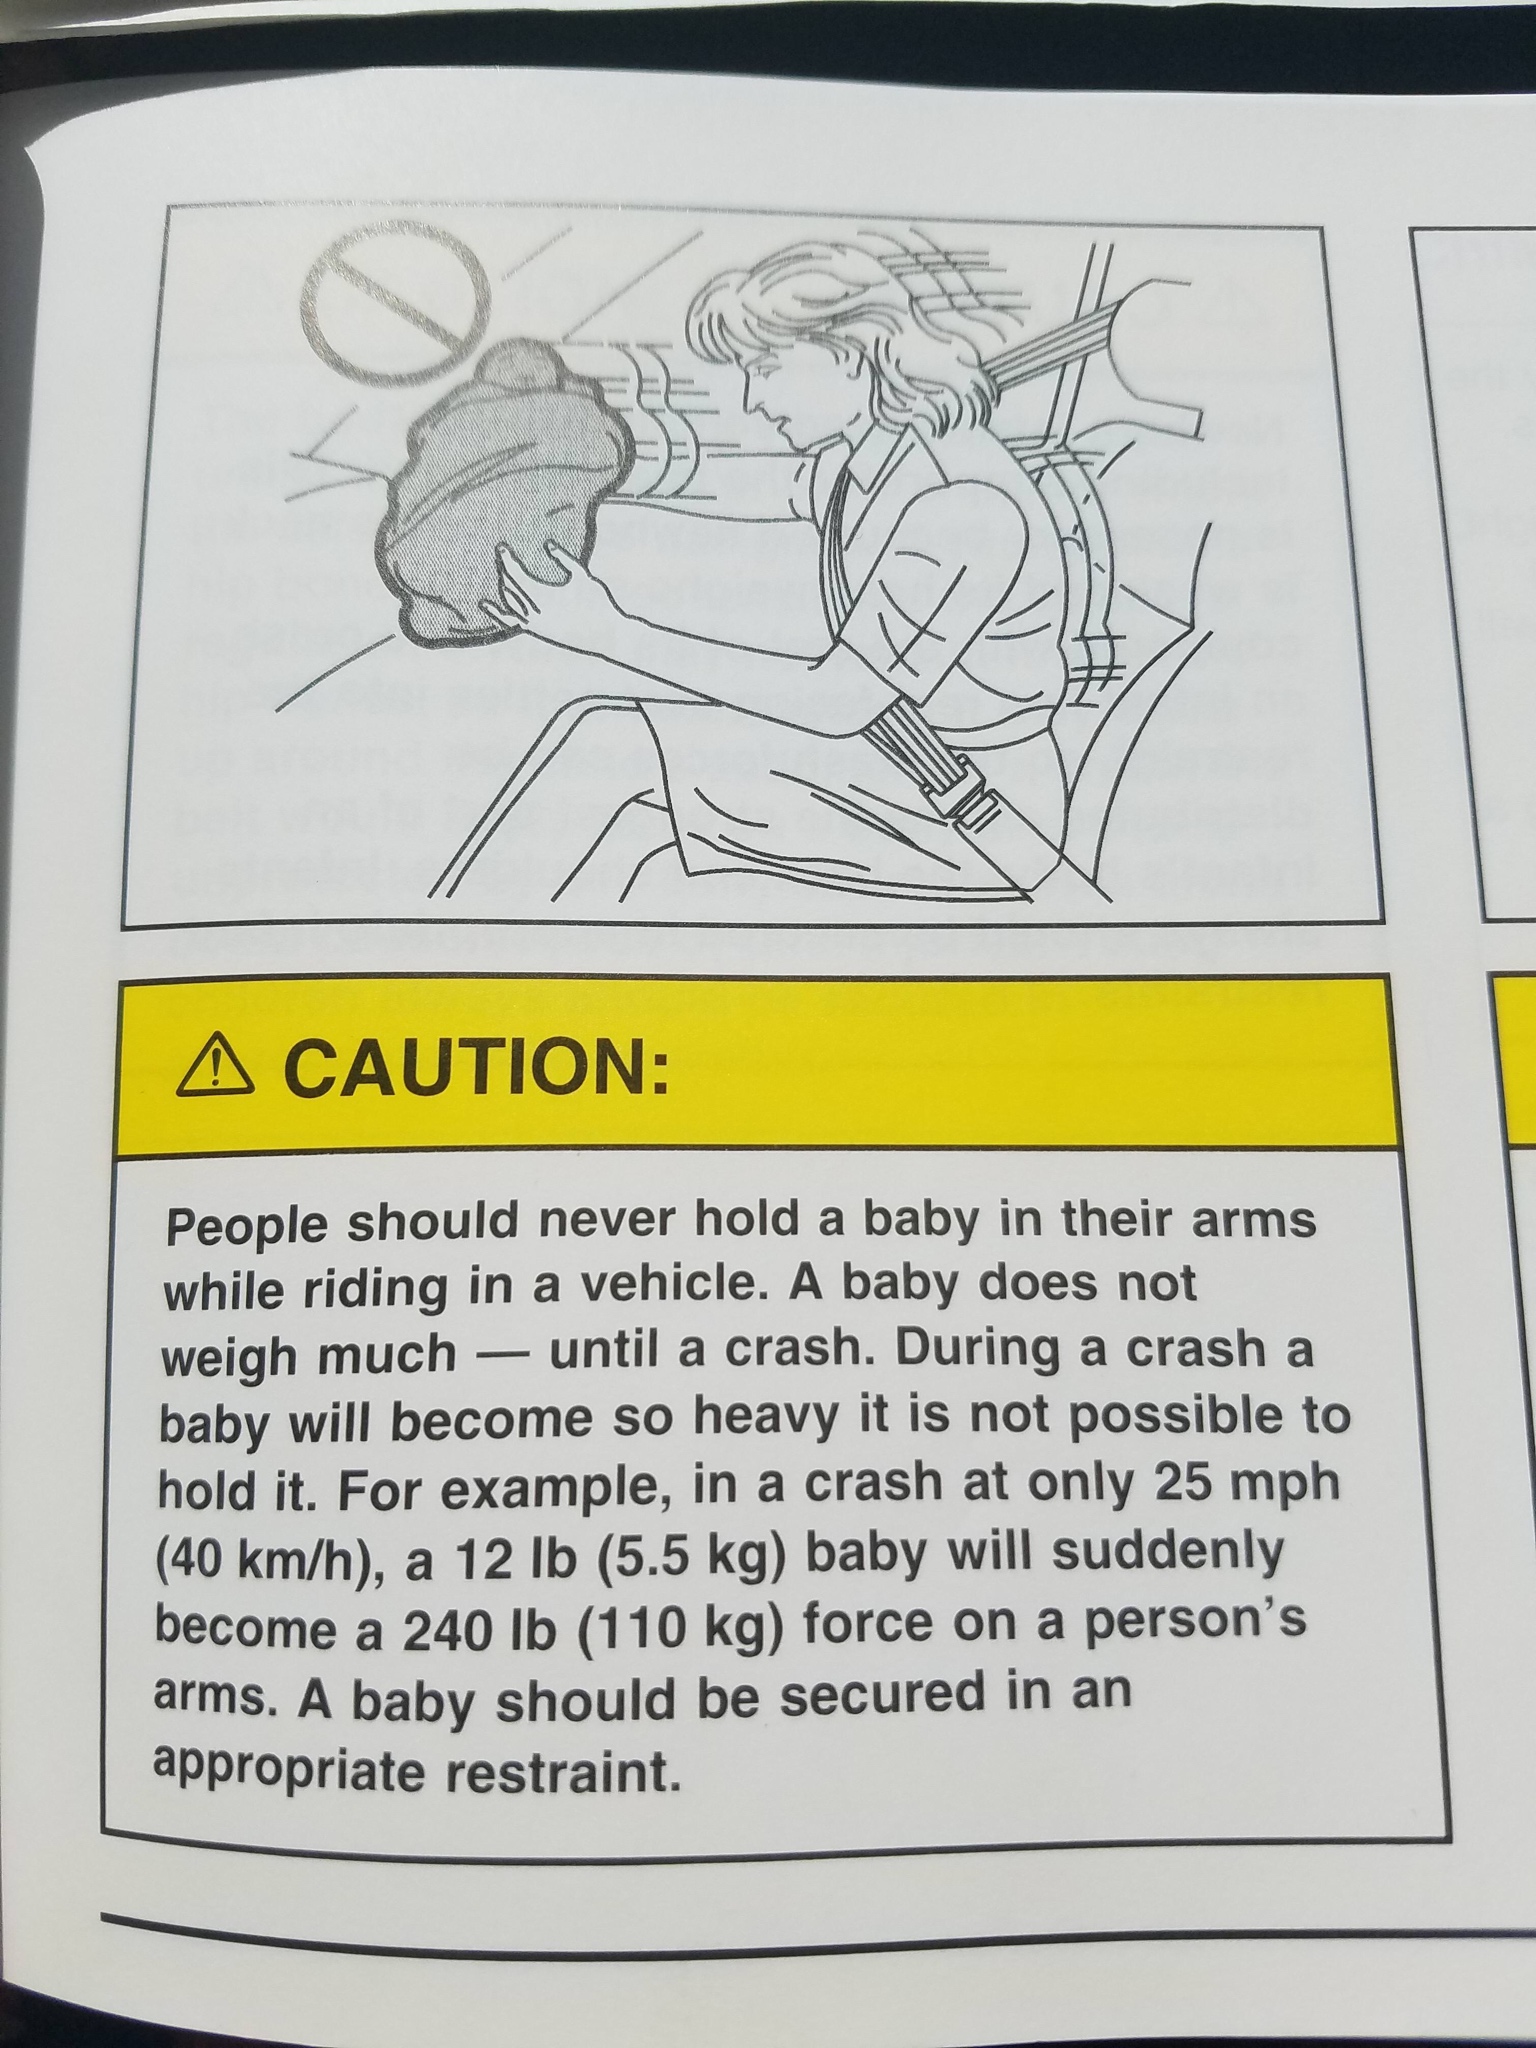 cartoon - A Caution People should never hold a baby in their arms while riding in a vehicle. A baby does not weigh much until a crash. During a crash a baby will become so heavy it is not possible to hold it. For example, in a crash at only 25 mph 40 kmh,